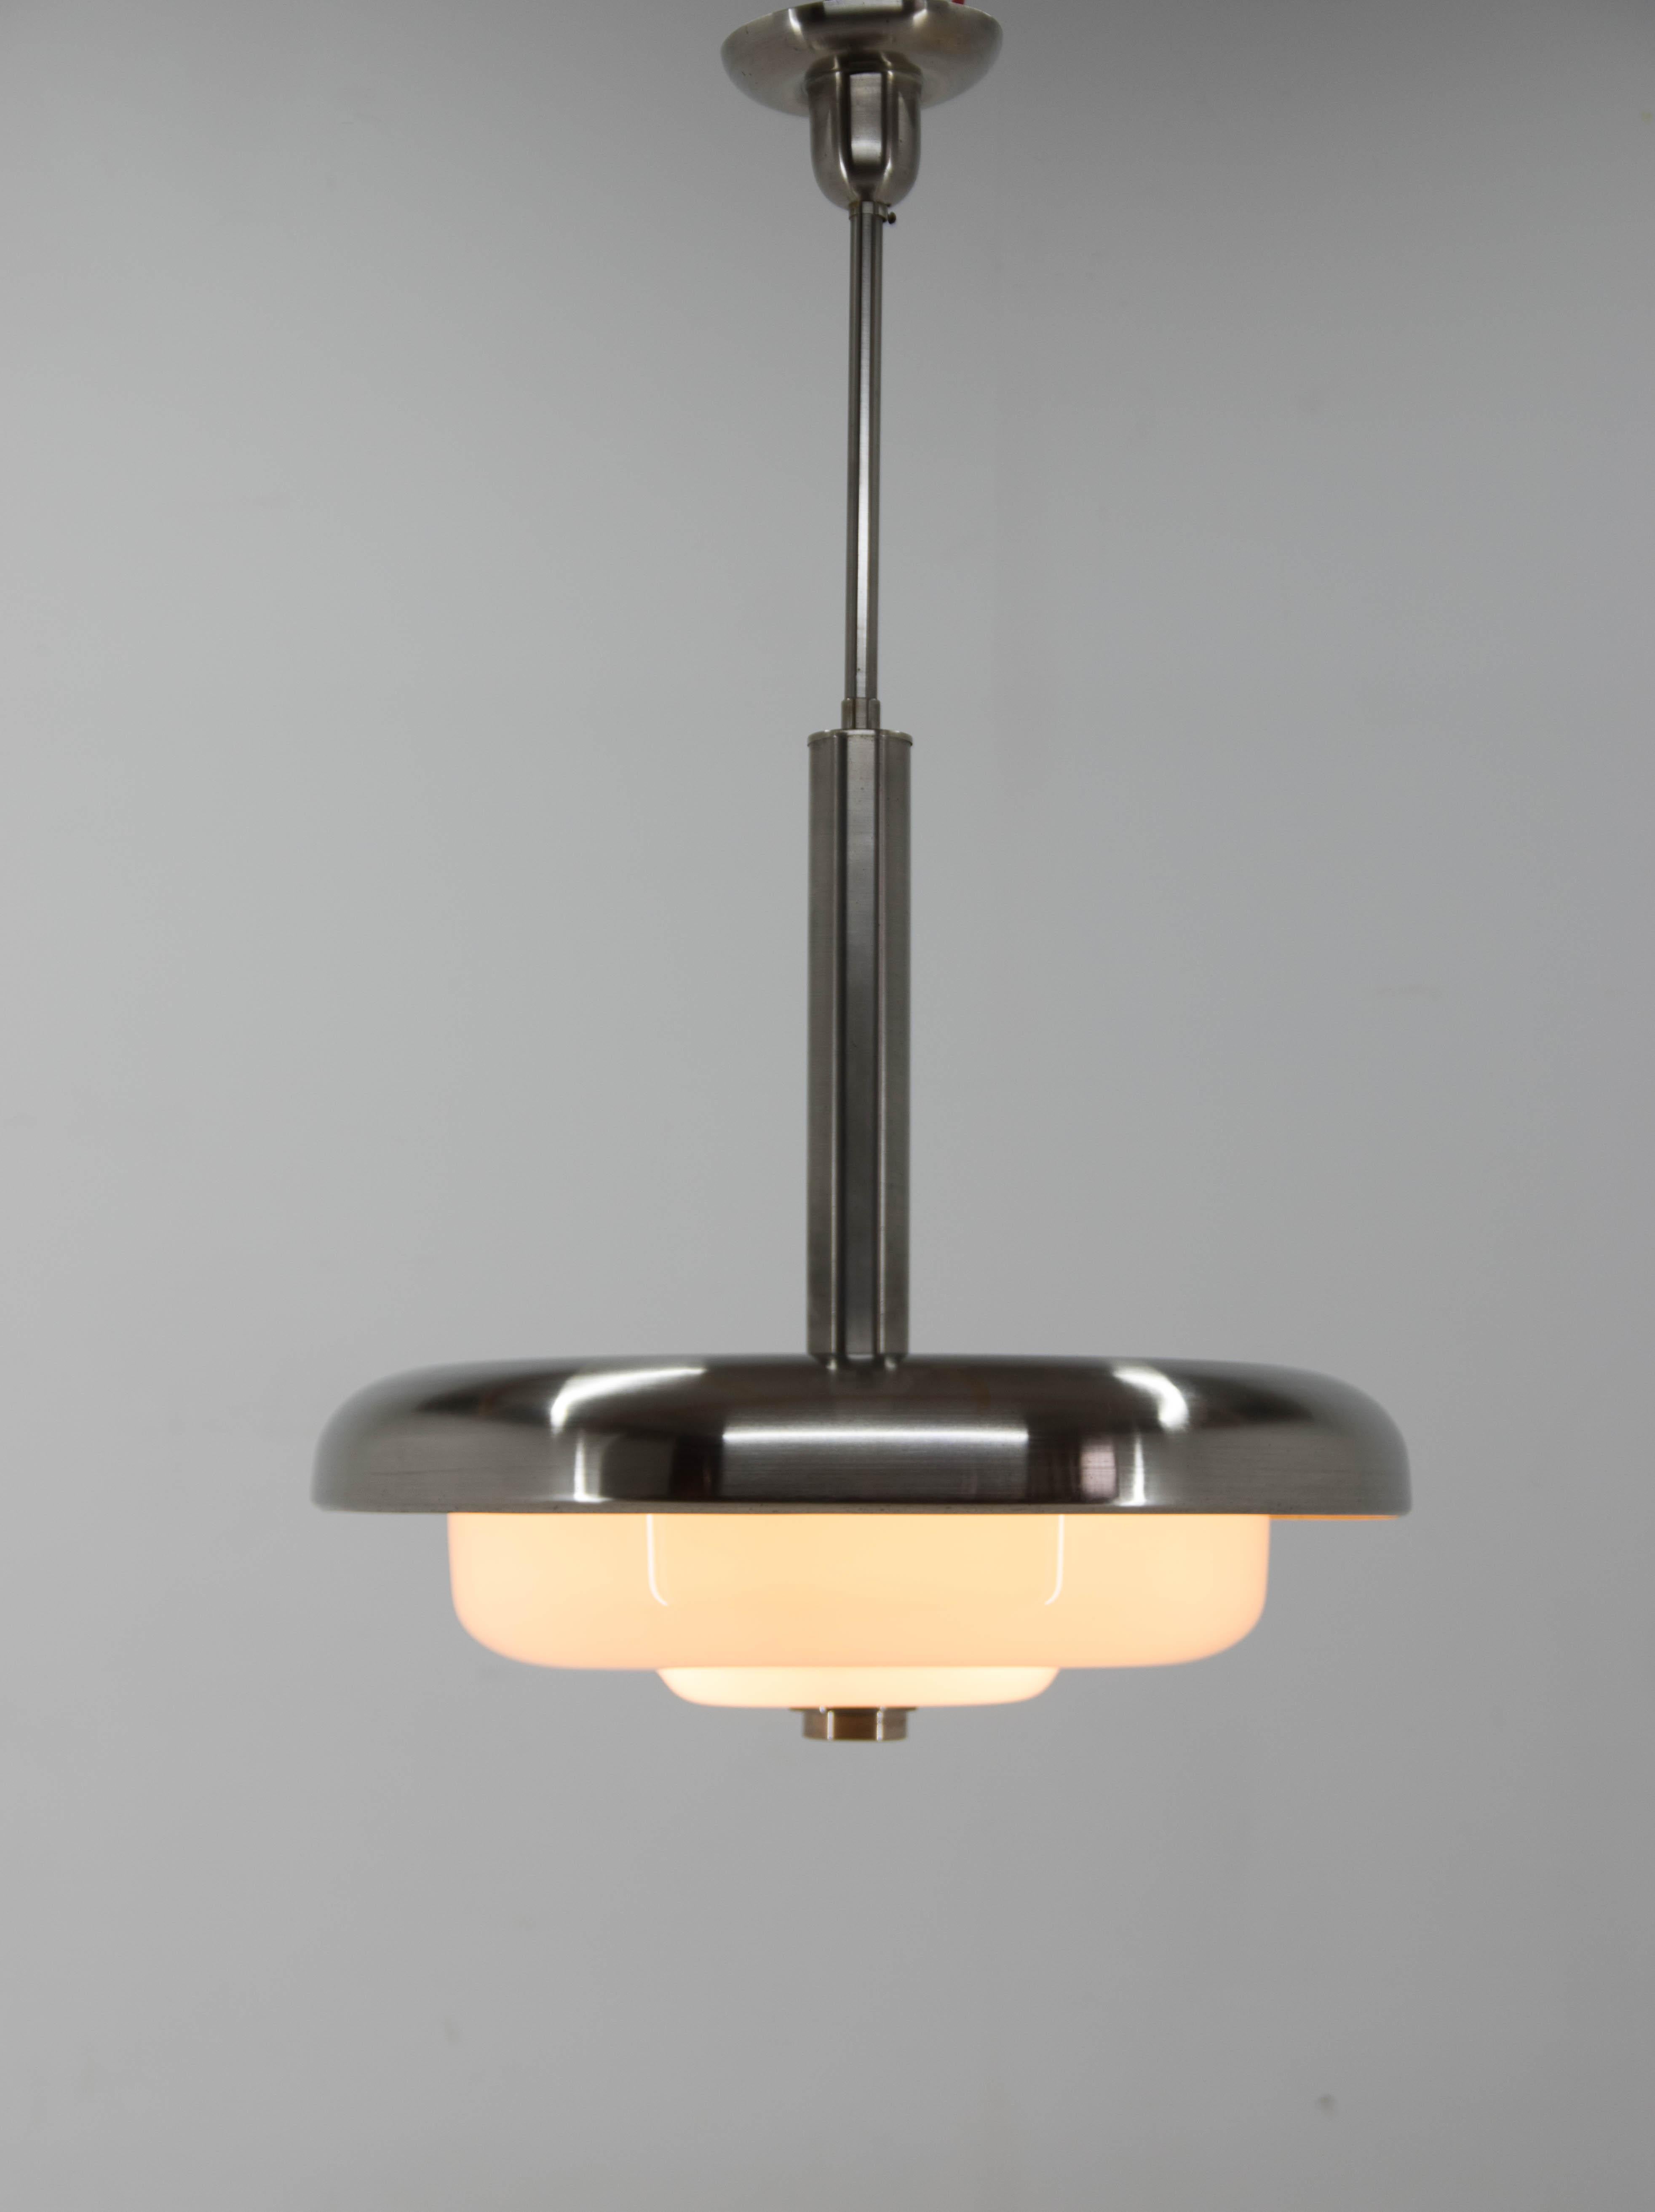 Mid-20th Century Ultra Rare Bauhaus Chandelier by IAS, 1930s For Sale